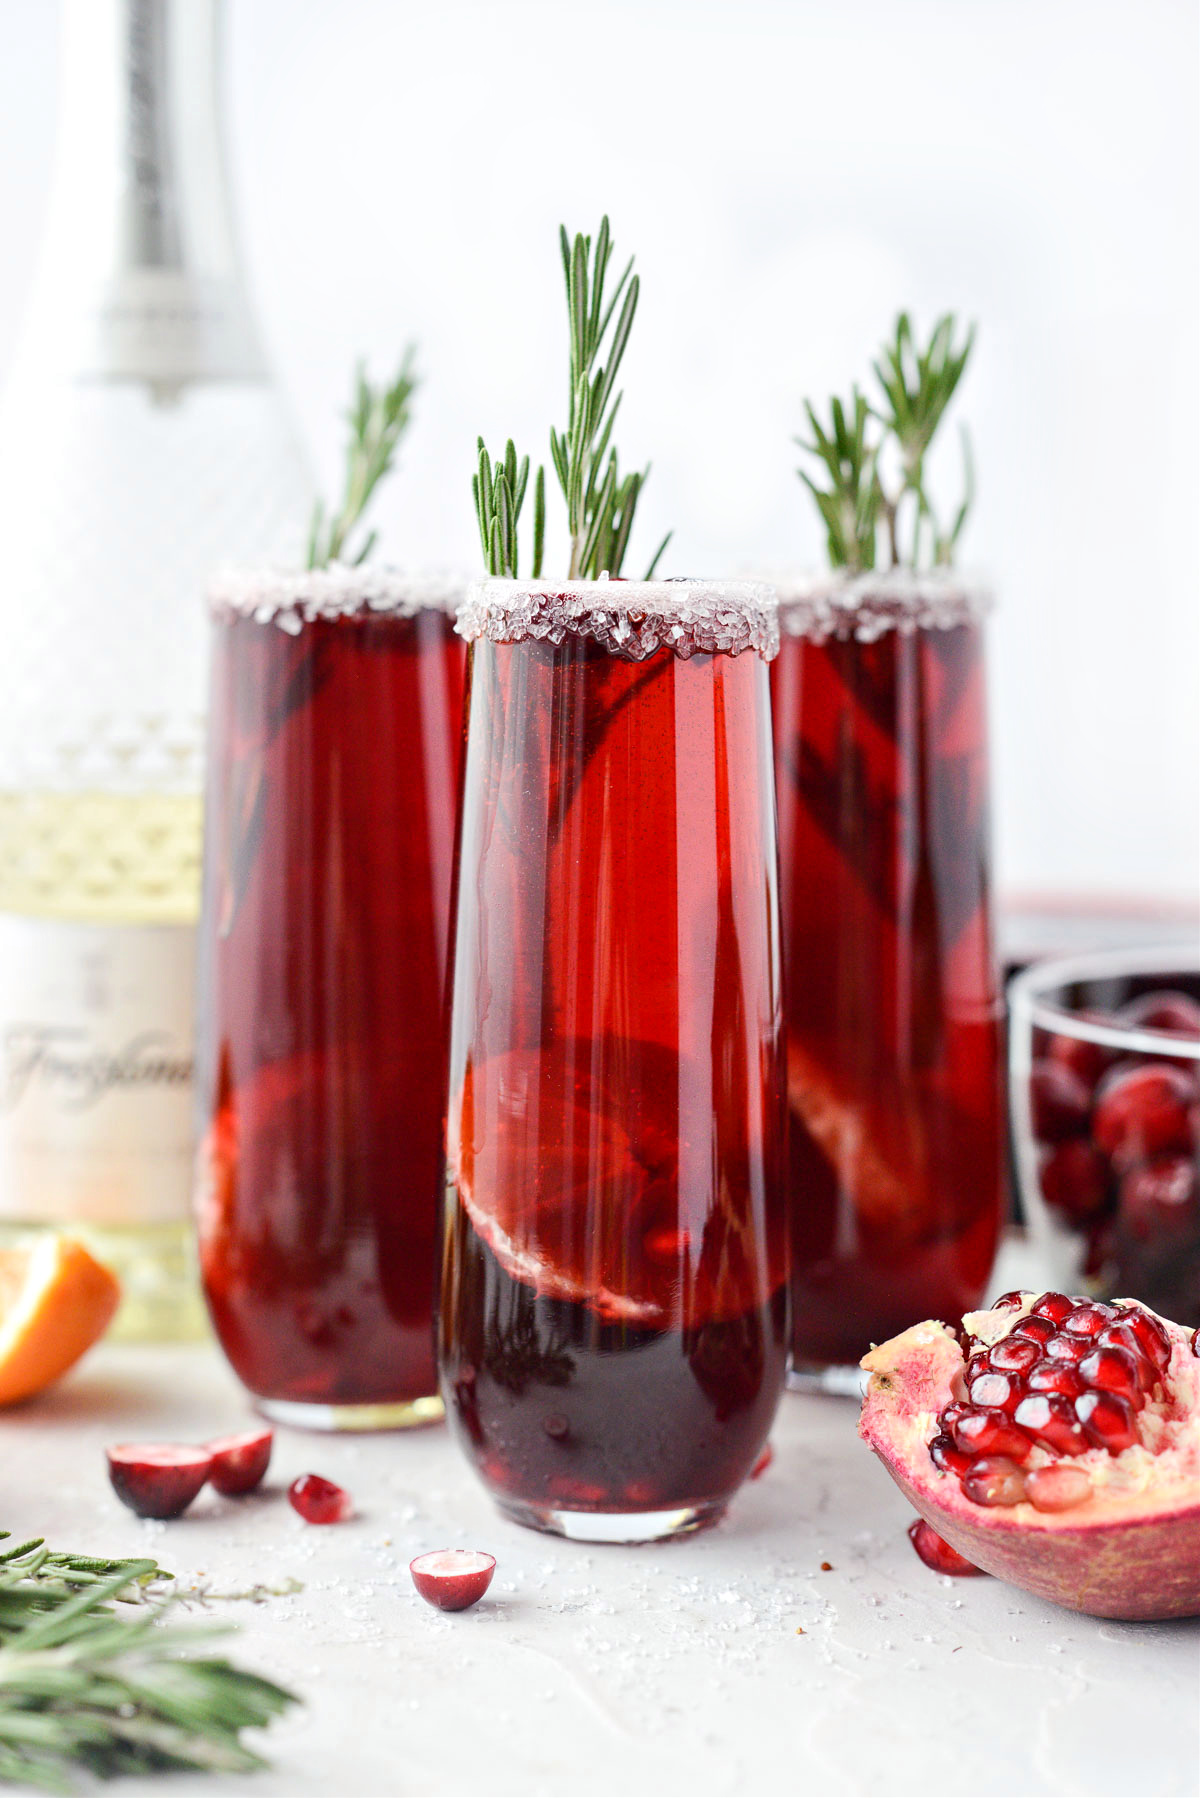 https://www.simplyscratch.com/wp-content/uploads/2020/12/Christmas-Morning-Mimosas-l-SimplyScratch.com-christmas-mimosas-prosecco-champagne-cocktail-adult-beverage-cranberry-pomegranate-cinnamon-15.jpg